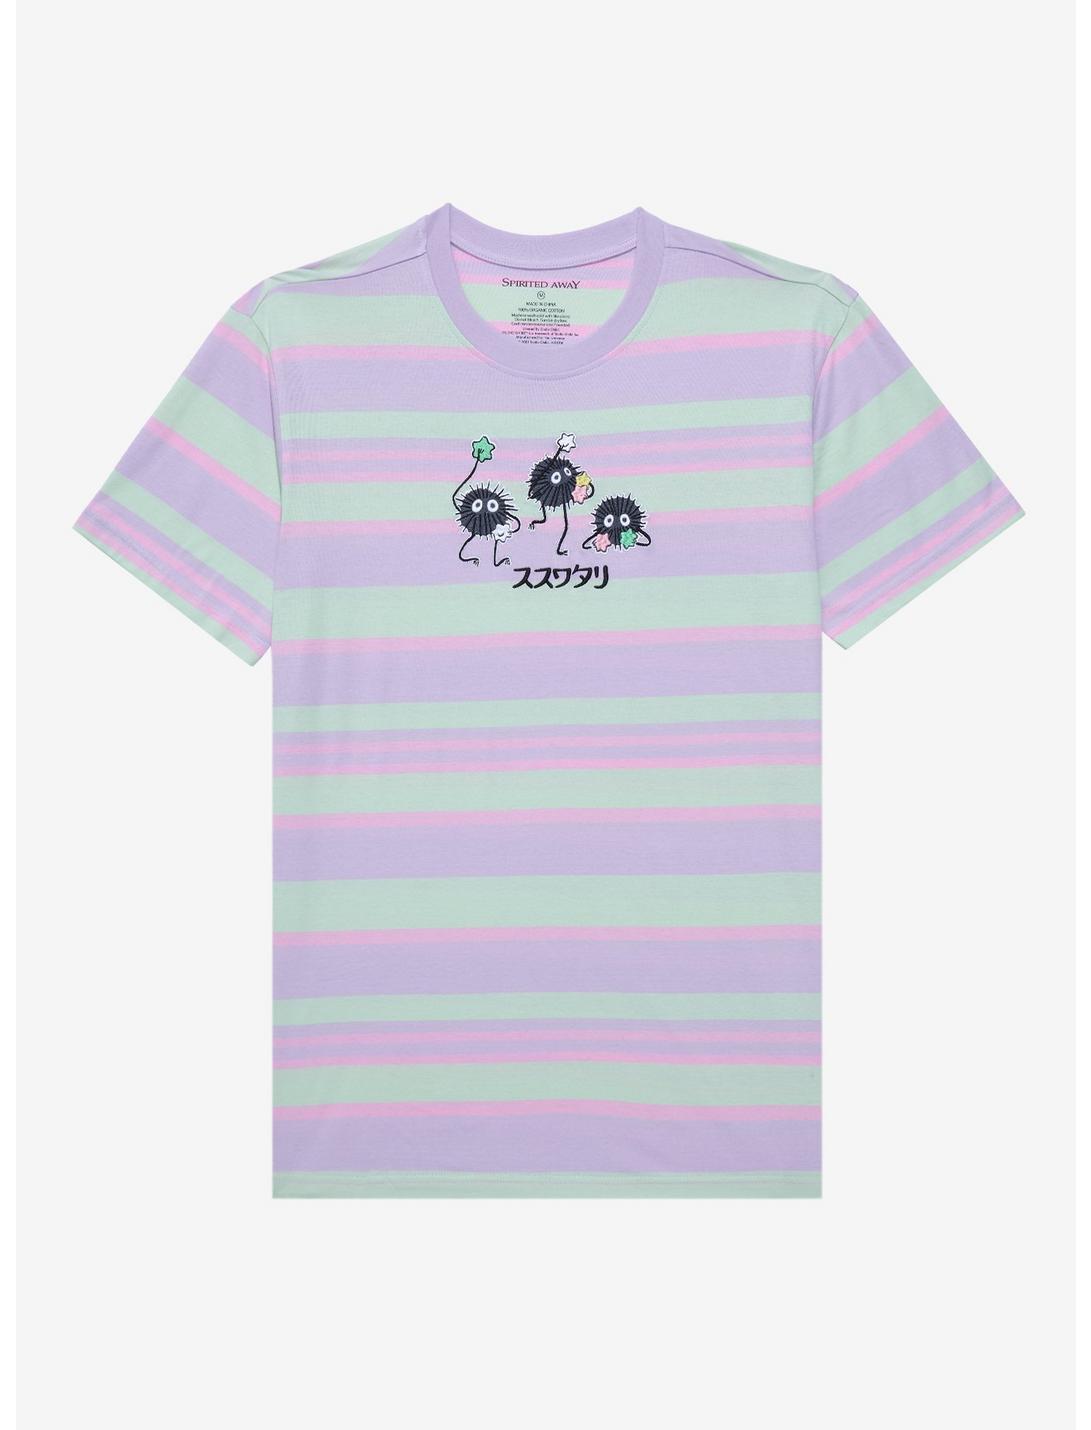 Studio Ghibli Spirited Away Soot Sprites Embroidered Striped T-Shirt - BoxLunch Exclusive, MULTI STRIPE, hi-res